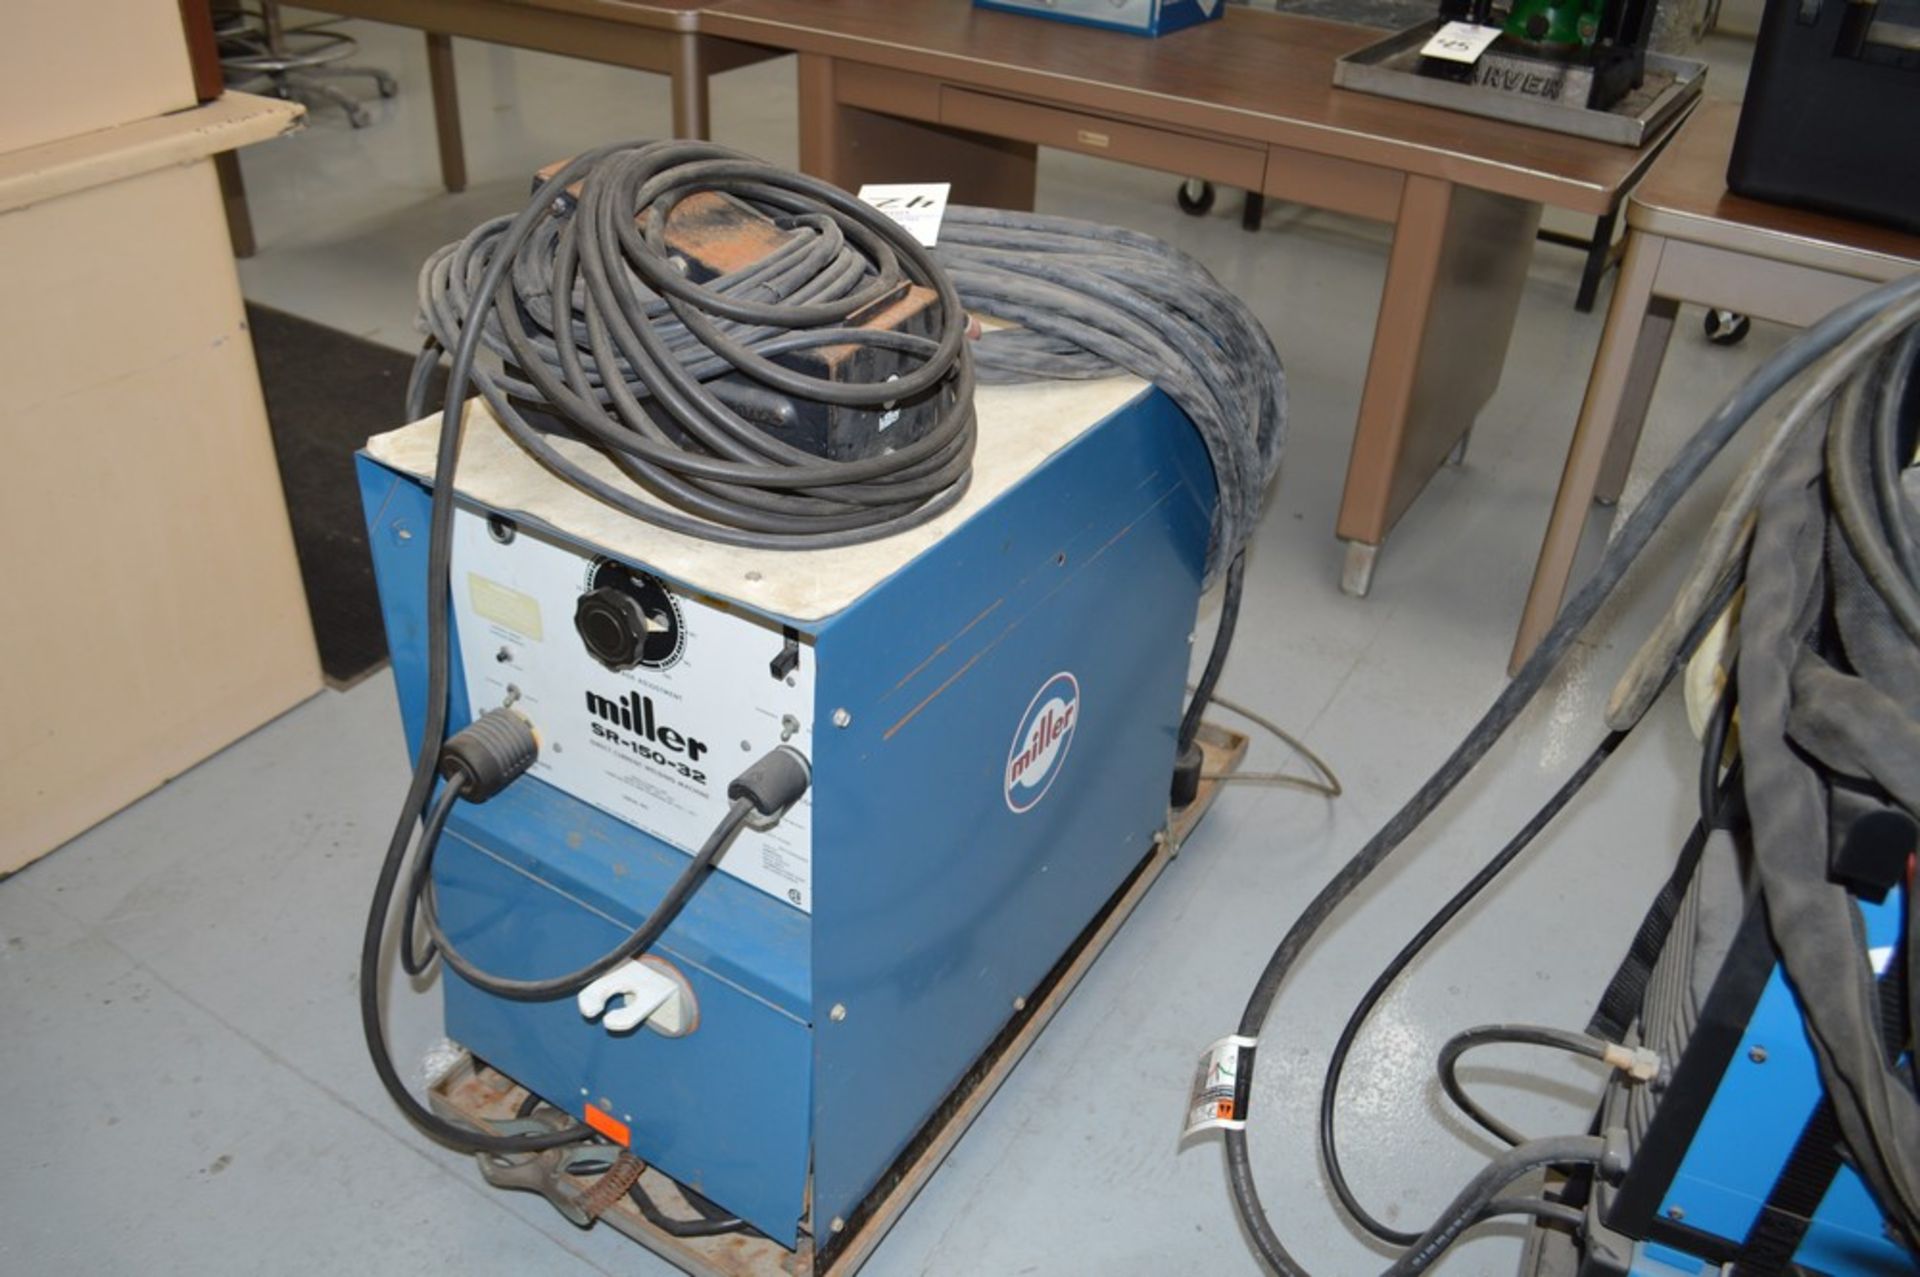 Miller SR-150-32 DC Welder on metal rolling cart, foot pedal and gas lines included - Image 4 of 5